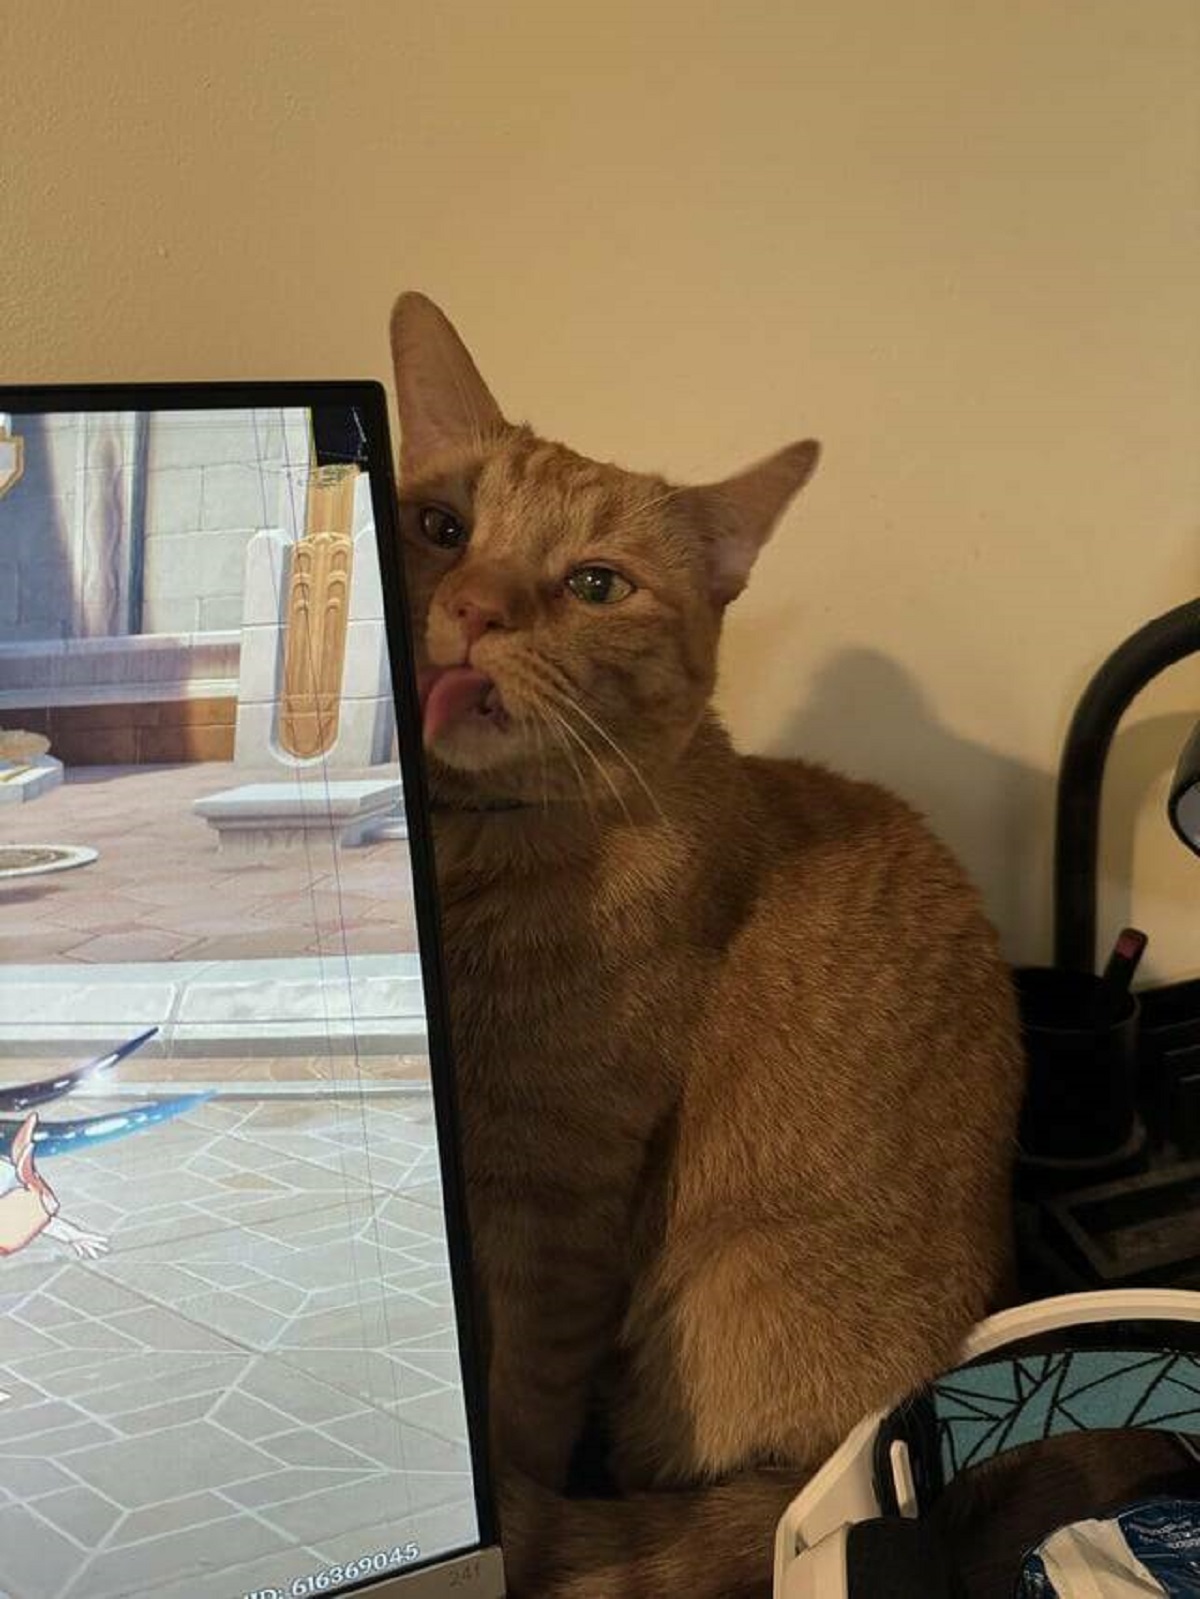 "Moved in with partner, and his cat chomped my monitor..."